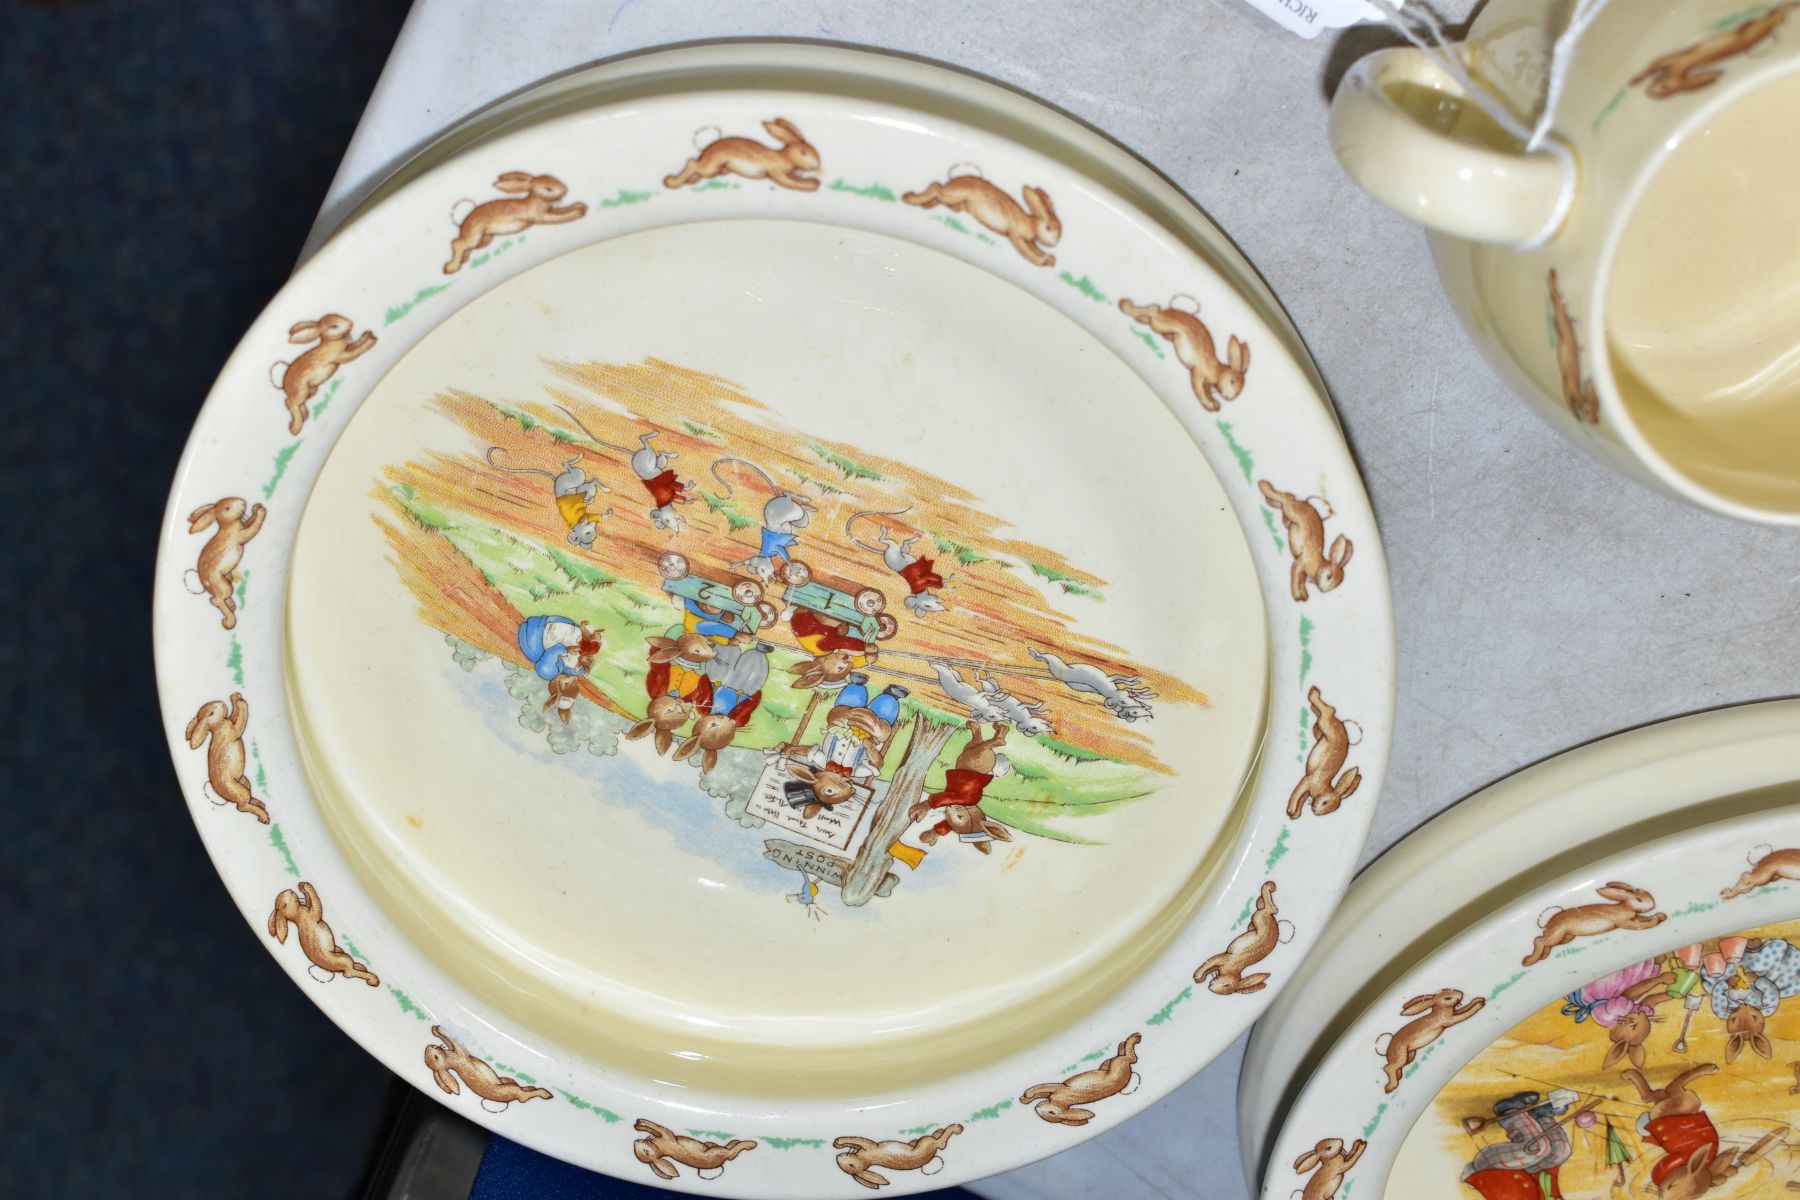 SIX PIECES OF ROYAL DOULTON BUNNYKINS EARTHENWARE TABLEWARES, DESIGNED BY BARBARA VERNON AND - Image 3 of 11